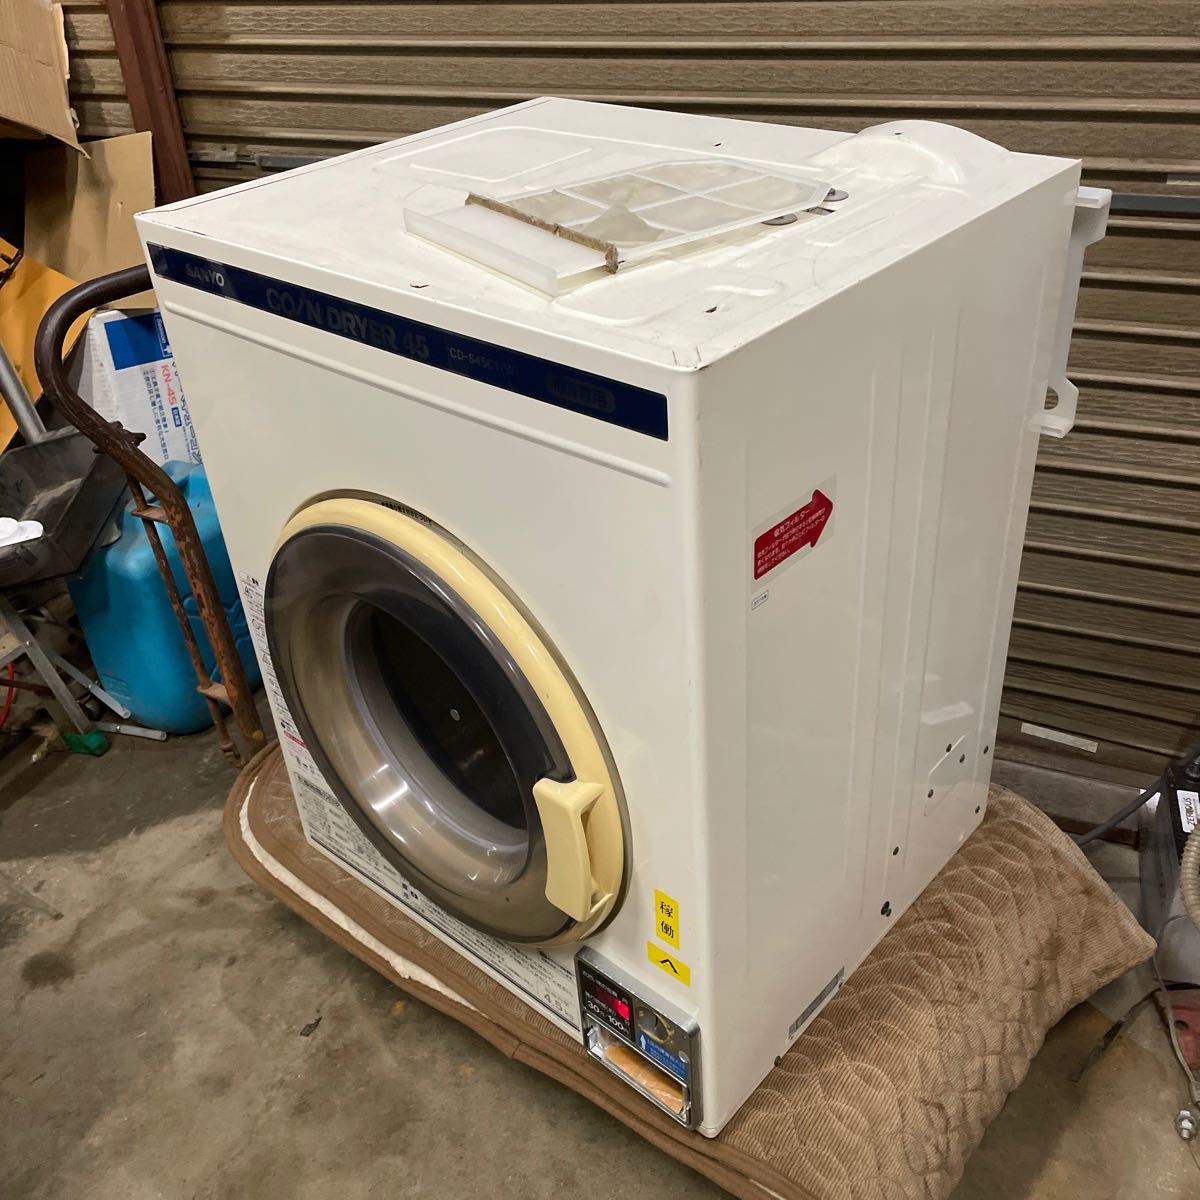  operation A simple operation verification goods Sanyo coin type dryer CD-S45C1 4.5kg 100V 2001 year made exhaust shape electric dryer dryer exclusive use unit SDS-401